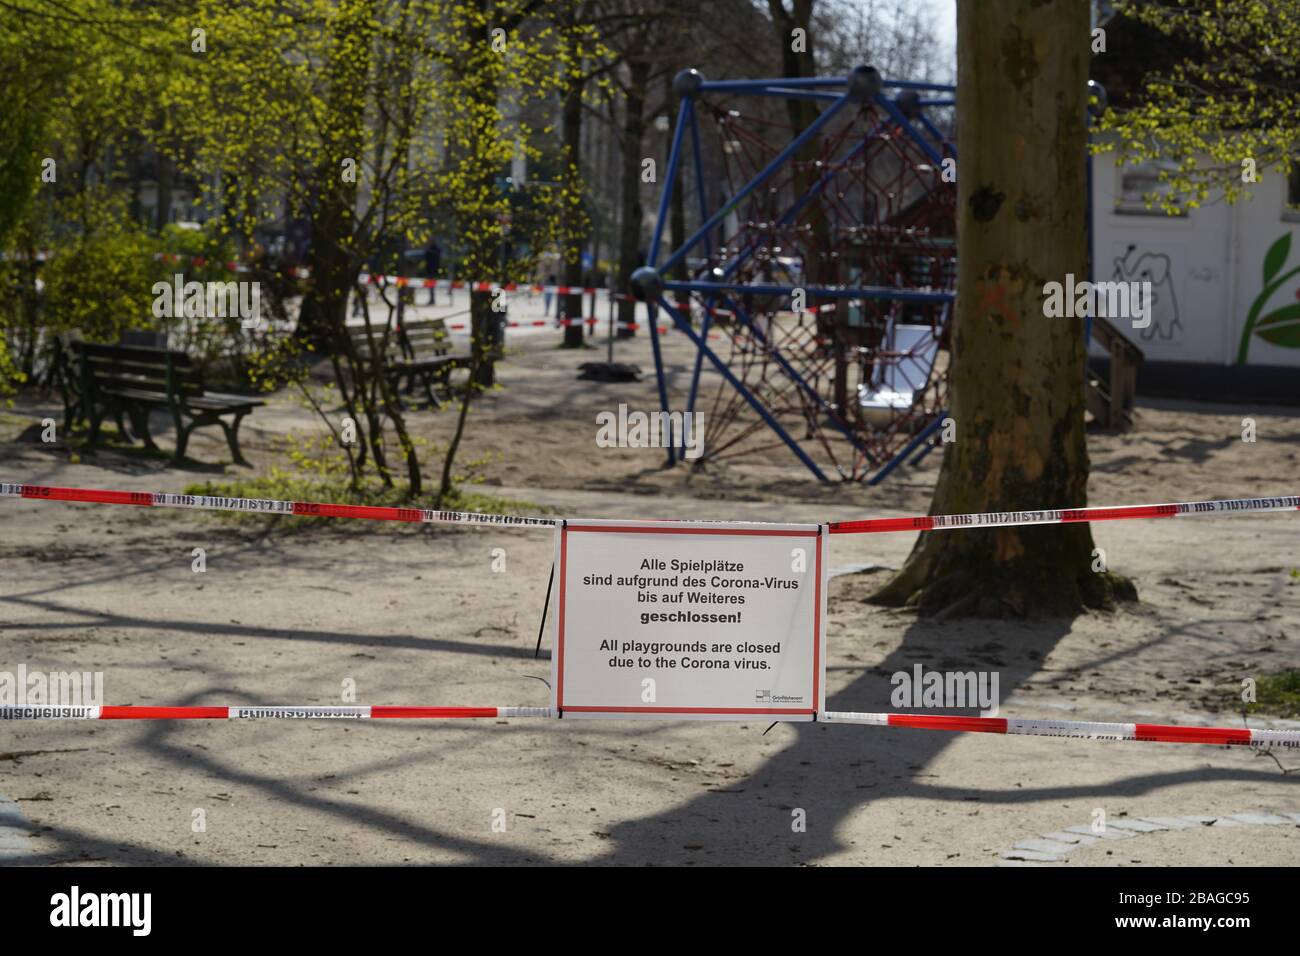 Closed Playgrounds in Frankfurt Germany due to Covid-19 Stock Photo